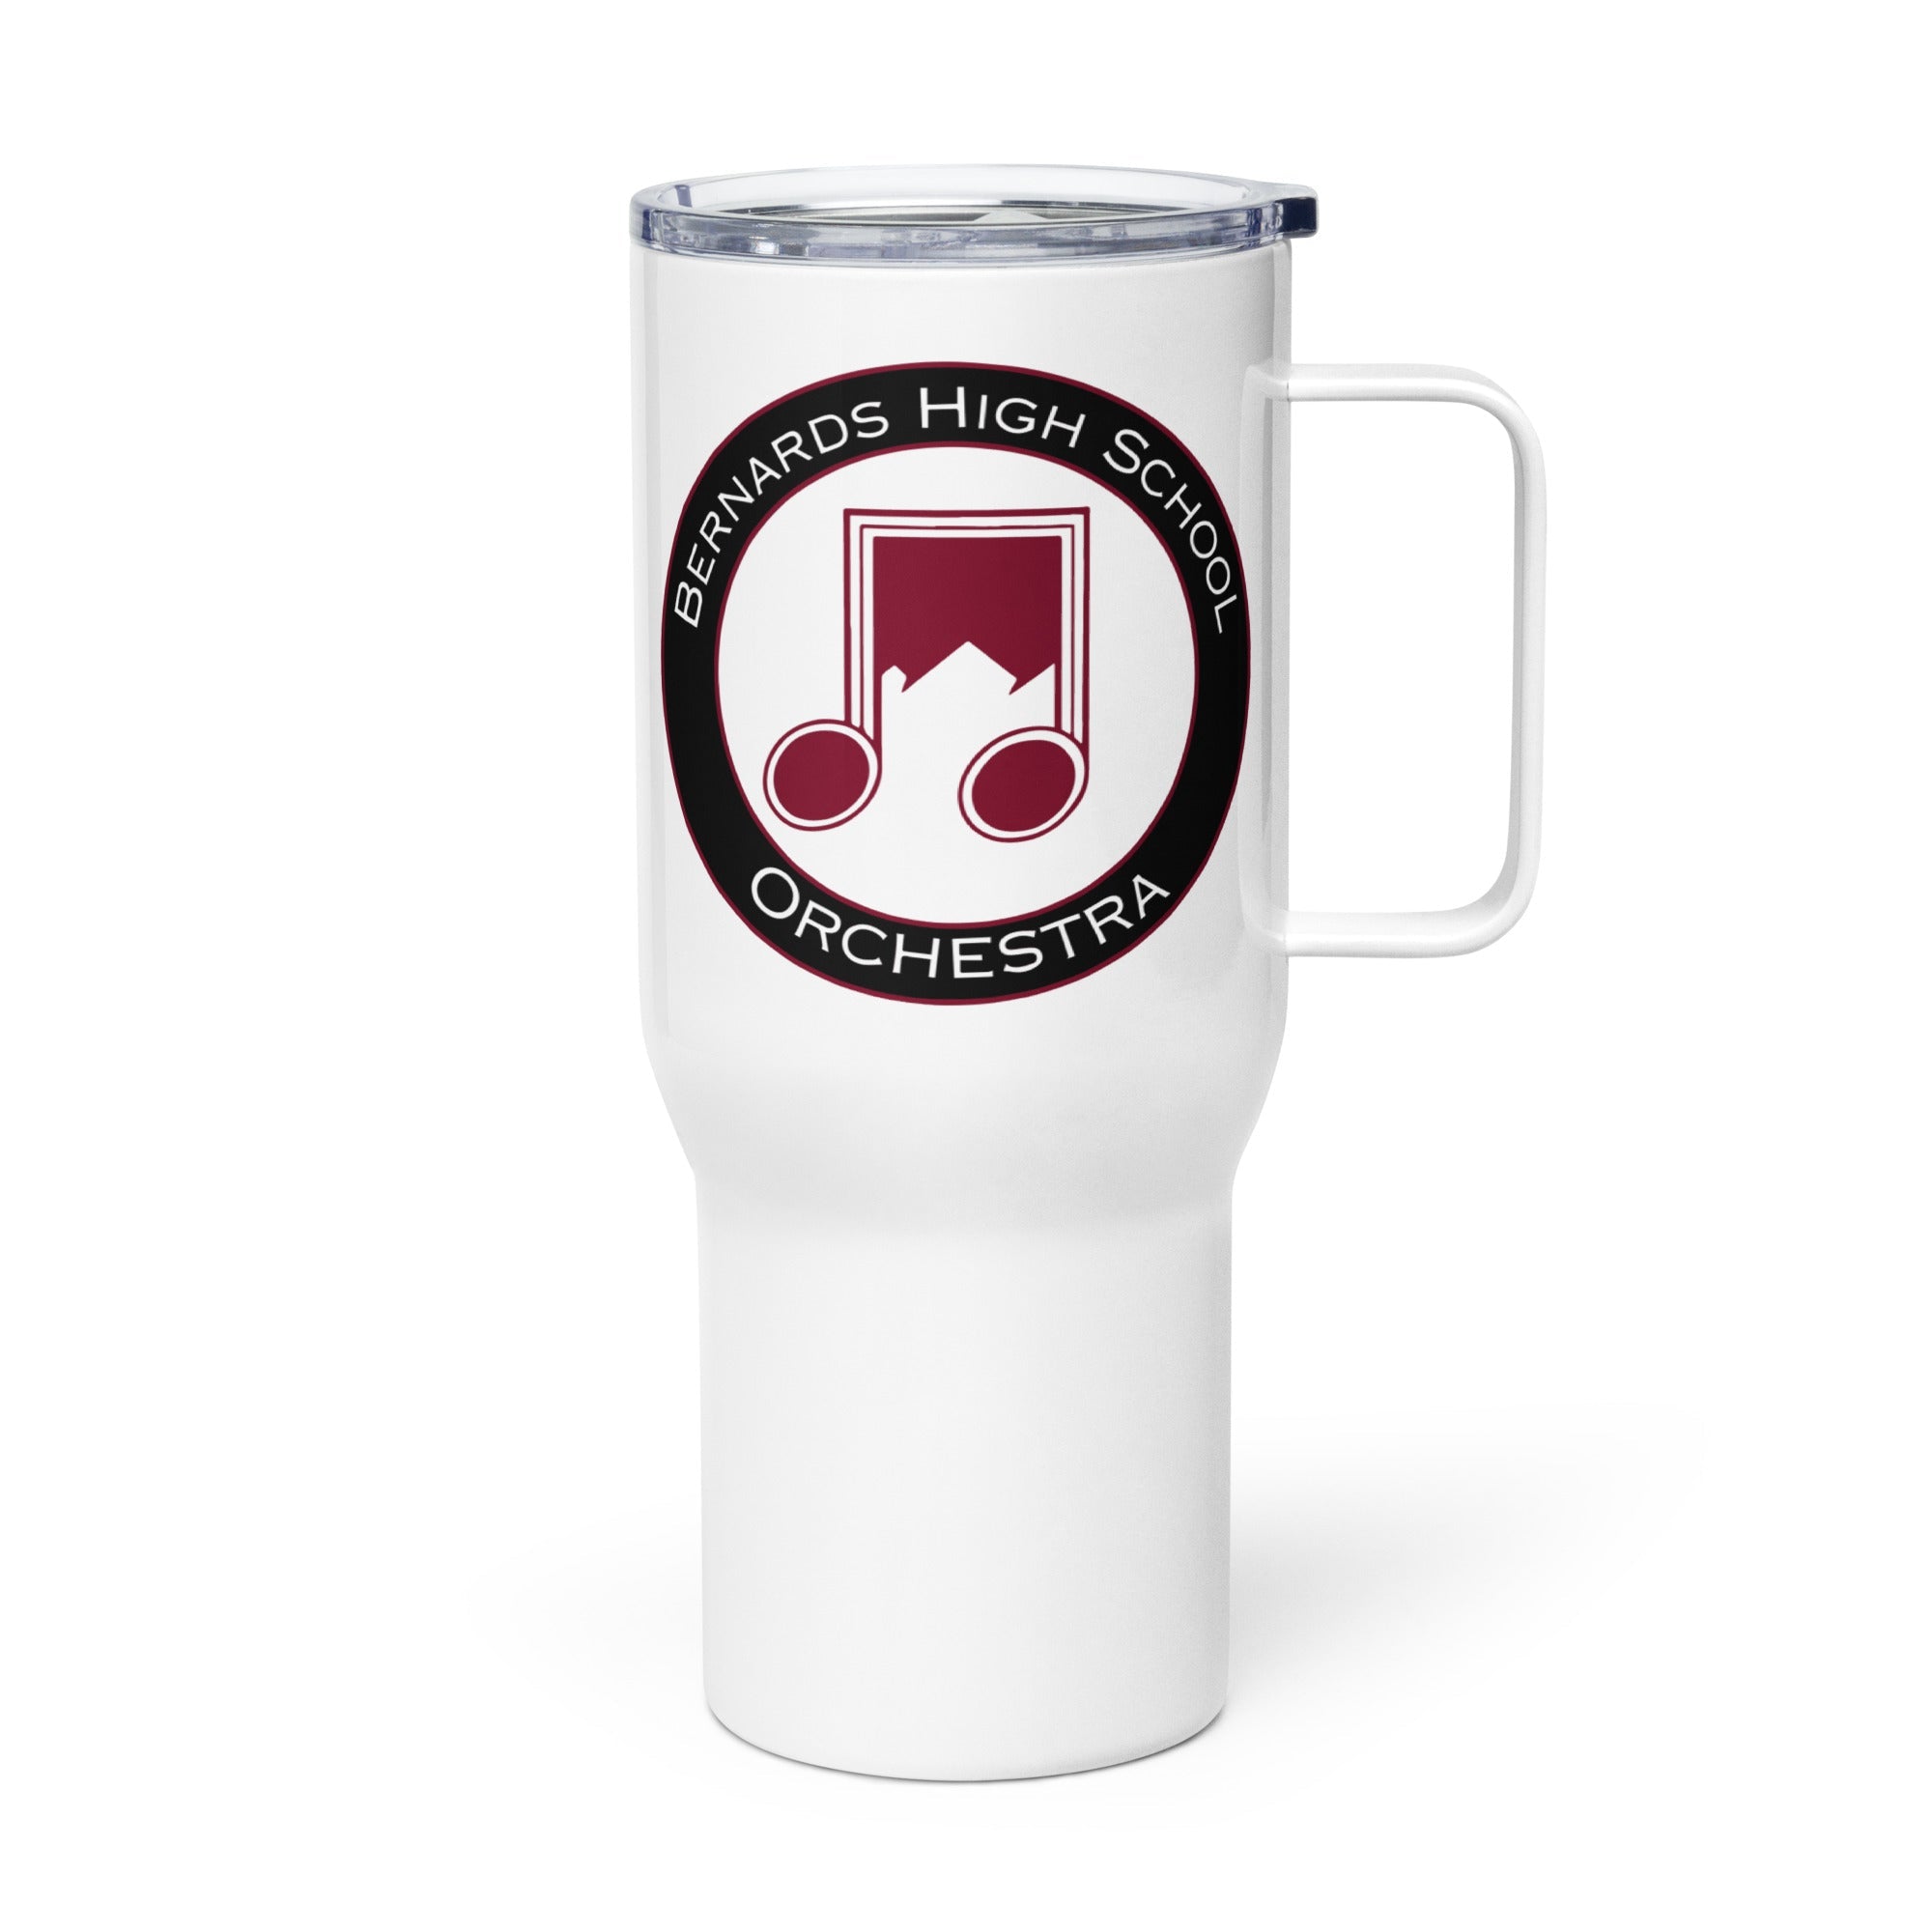 BHS Band Orchestra Travel mug with a handle